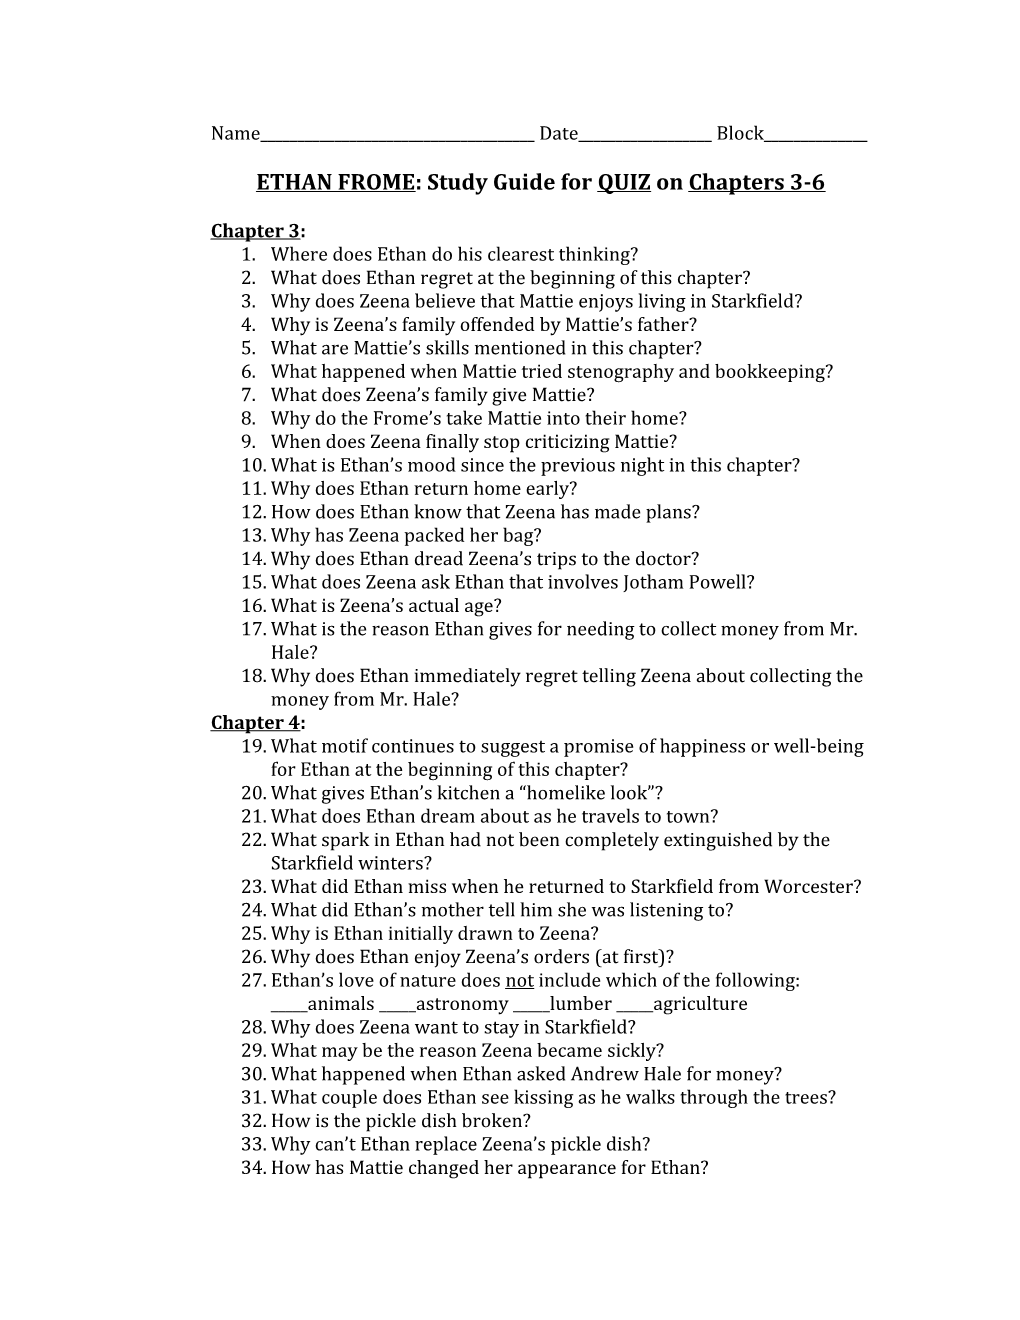 ETHAN FROME: Study Guide for QUIZ on Chapters 3-6